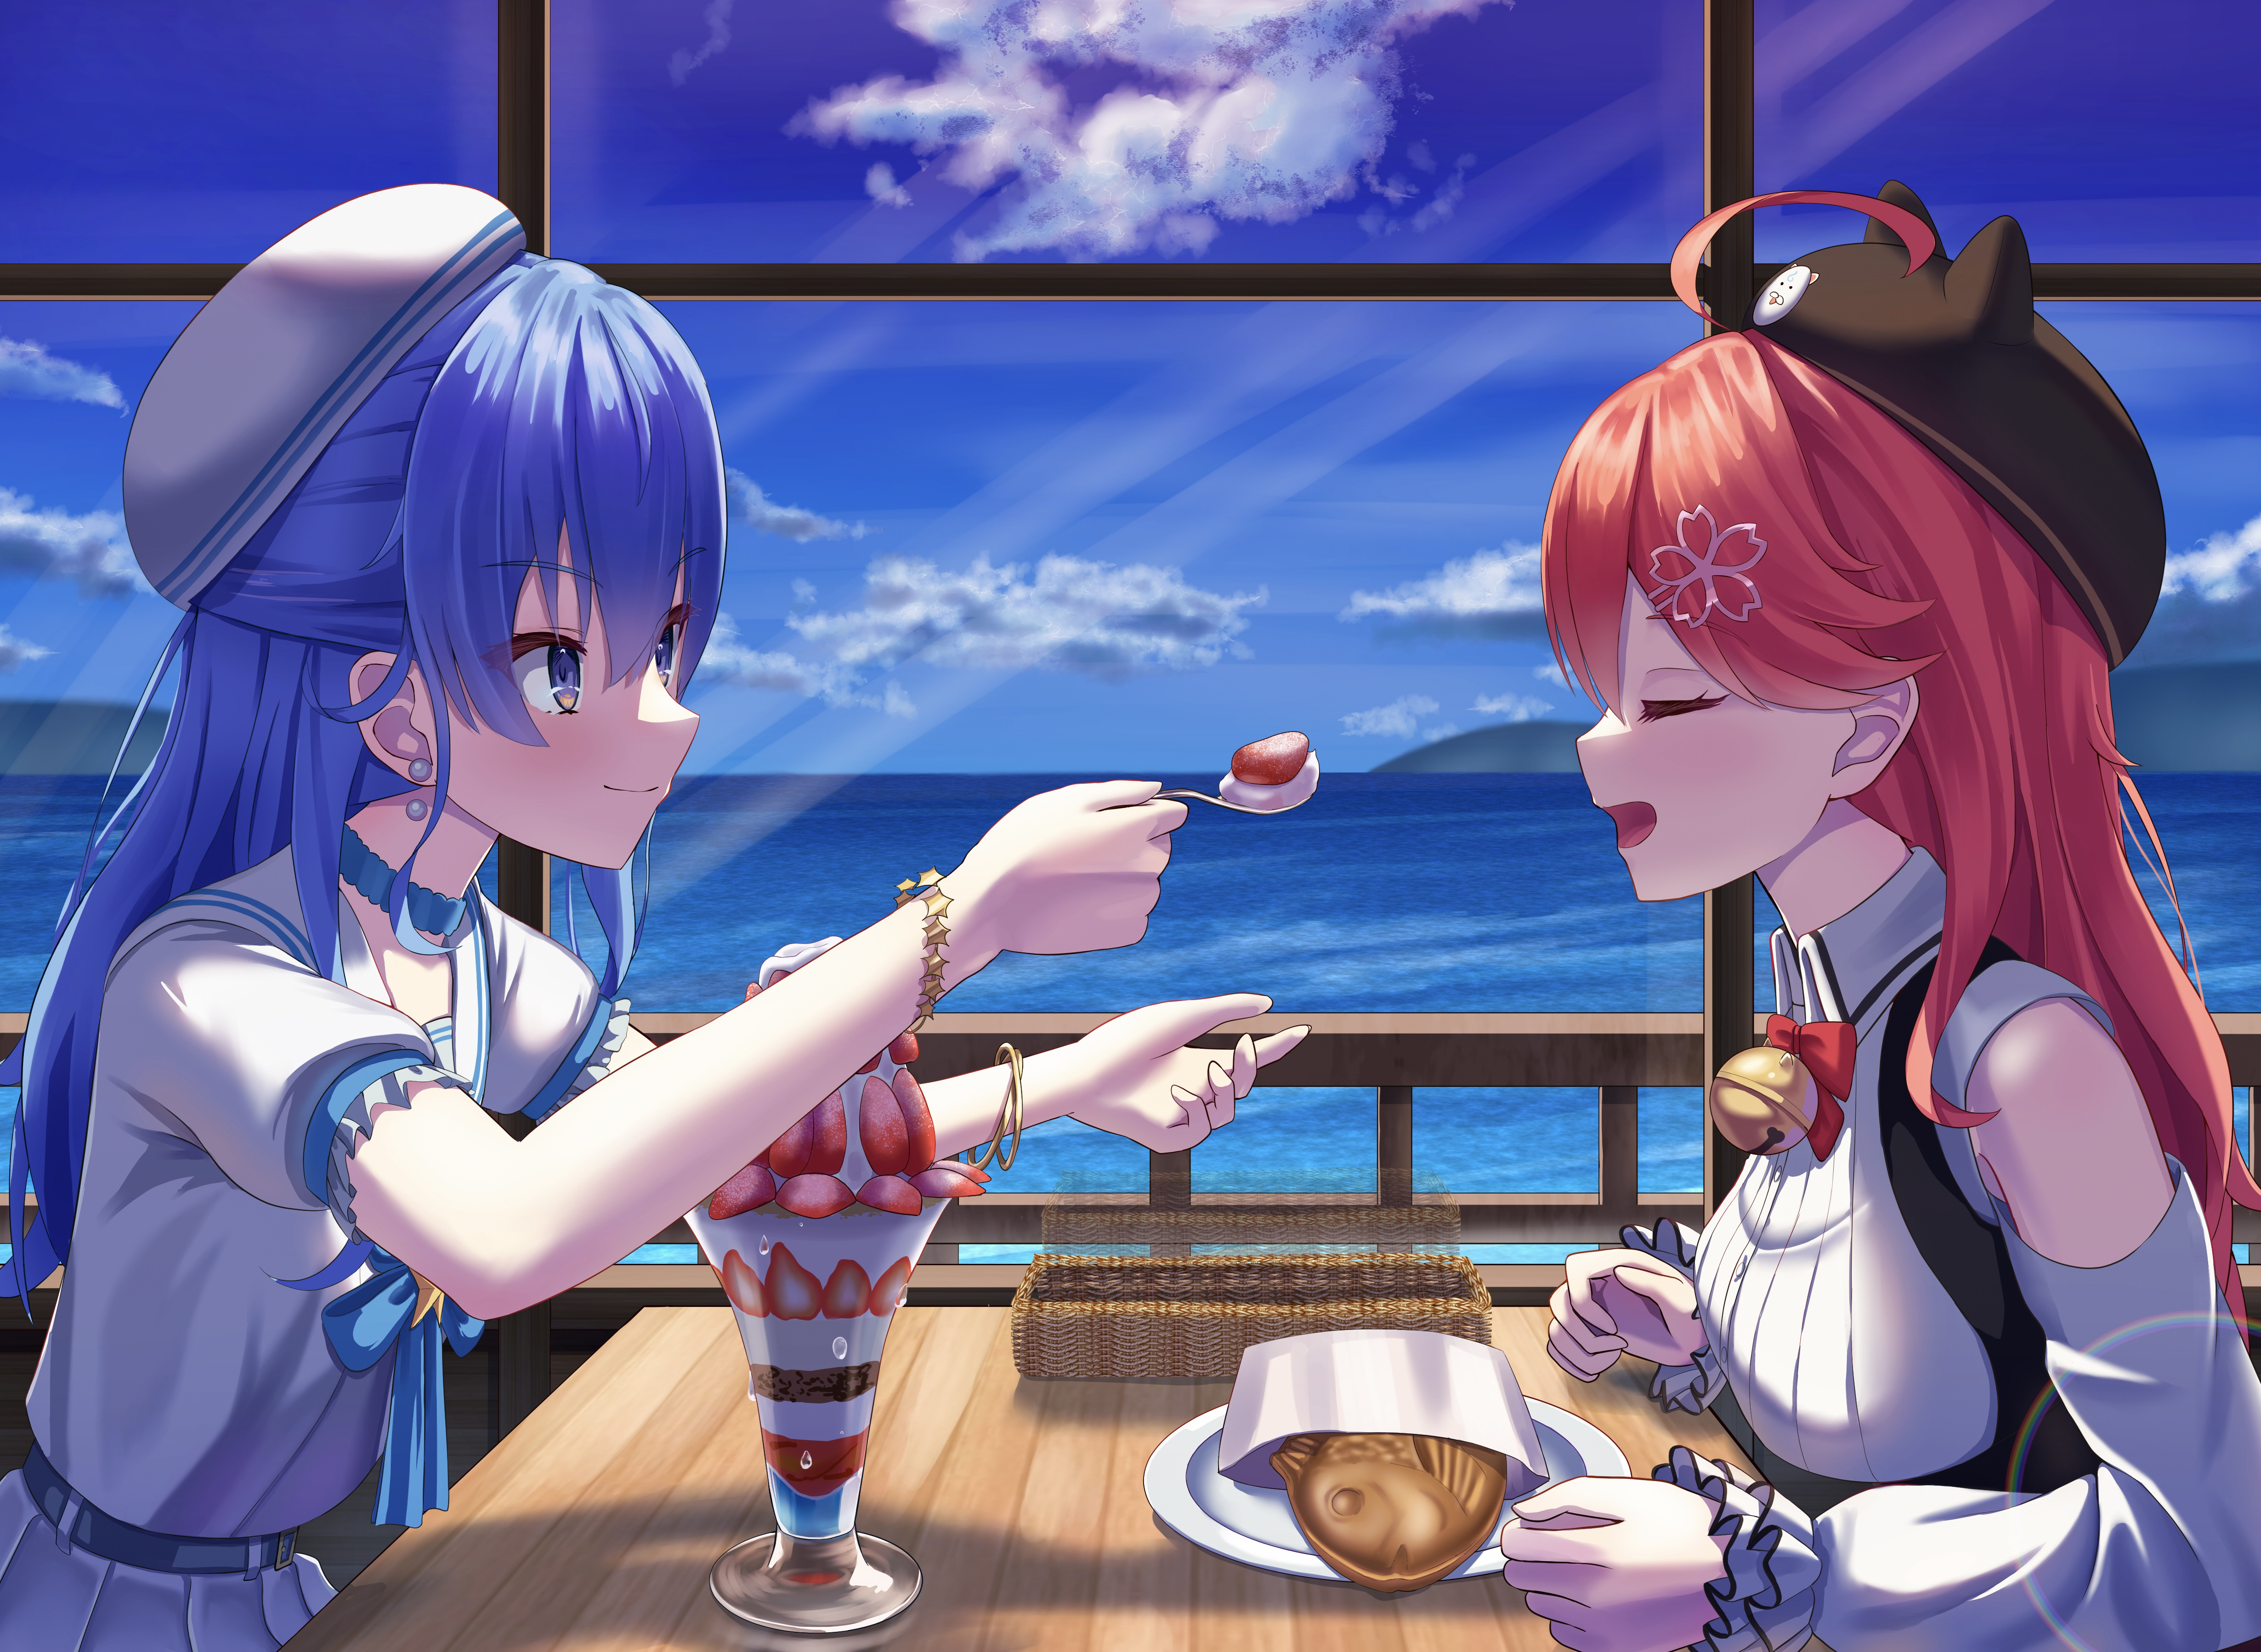 Anime 4921x3596 anime anime girls Hololive Virtual Youtuber Sakura Miko long hair blue hair pink hair two women artwork digital art fan art strawberries clouds water Hoshimachi Suisei sky spoon wood table ice cream hat closed eyes open mouth window bracelets smiling closed mouth bare shoulders bells earring fruit plates